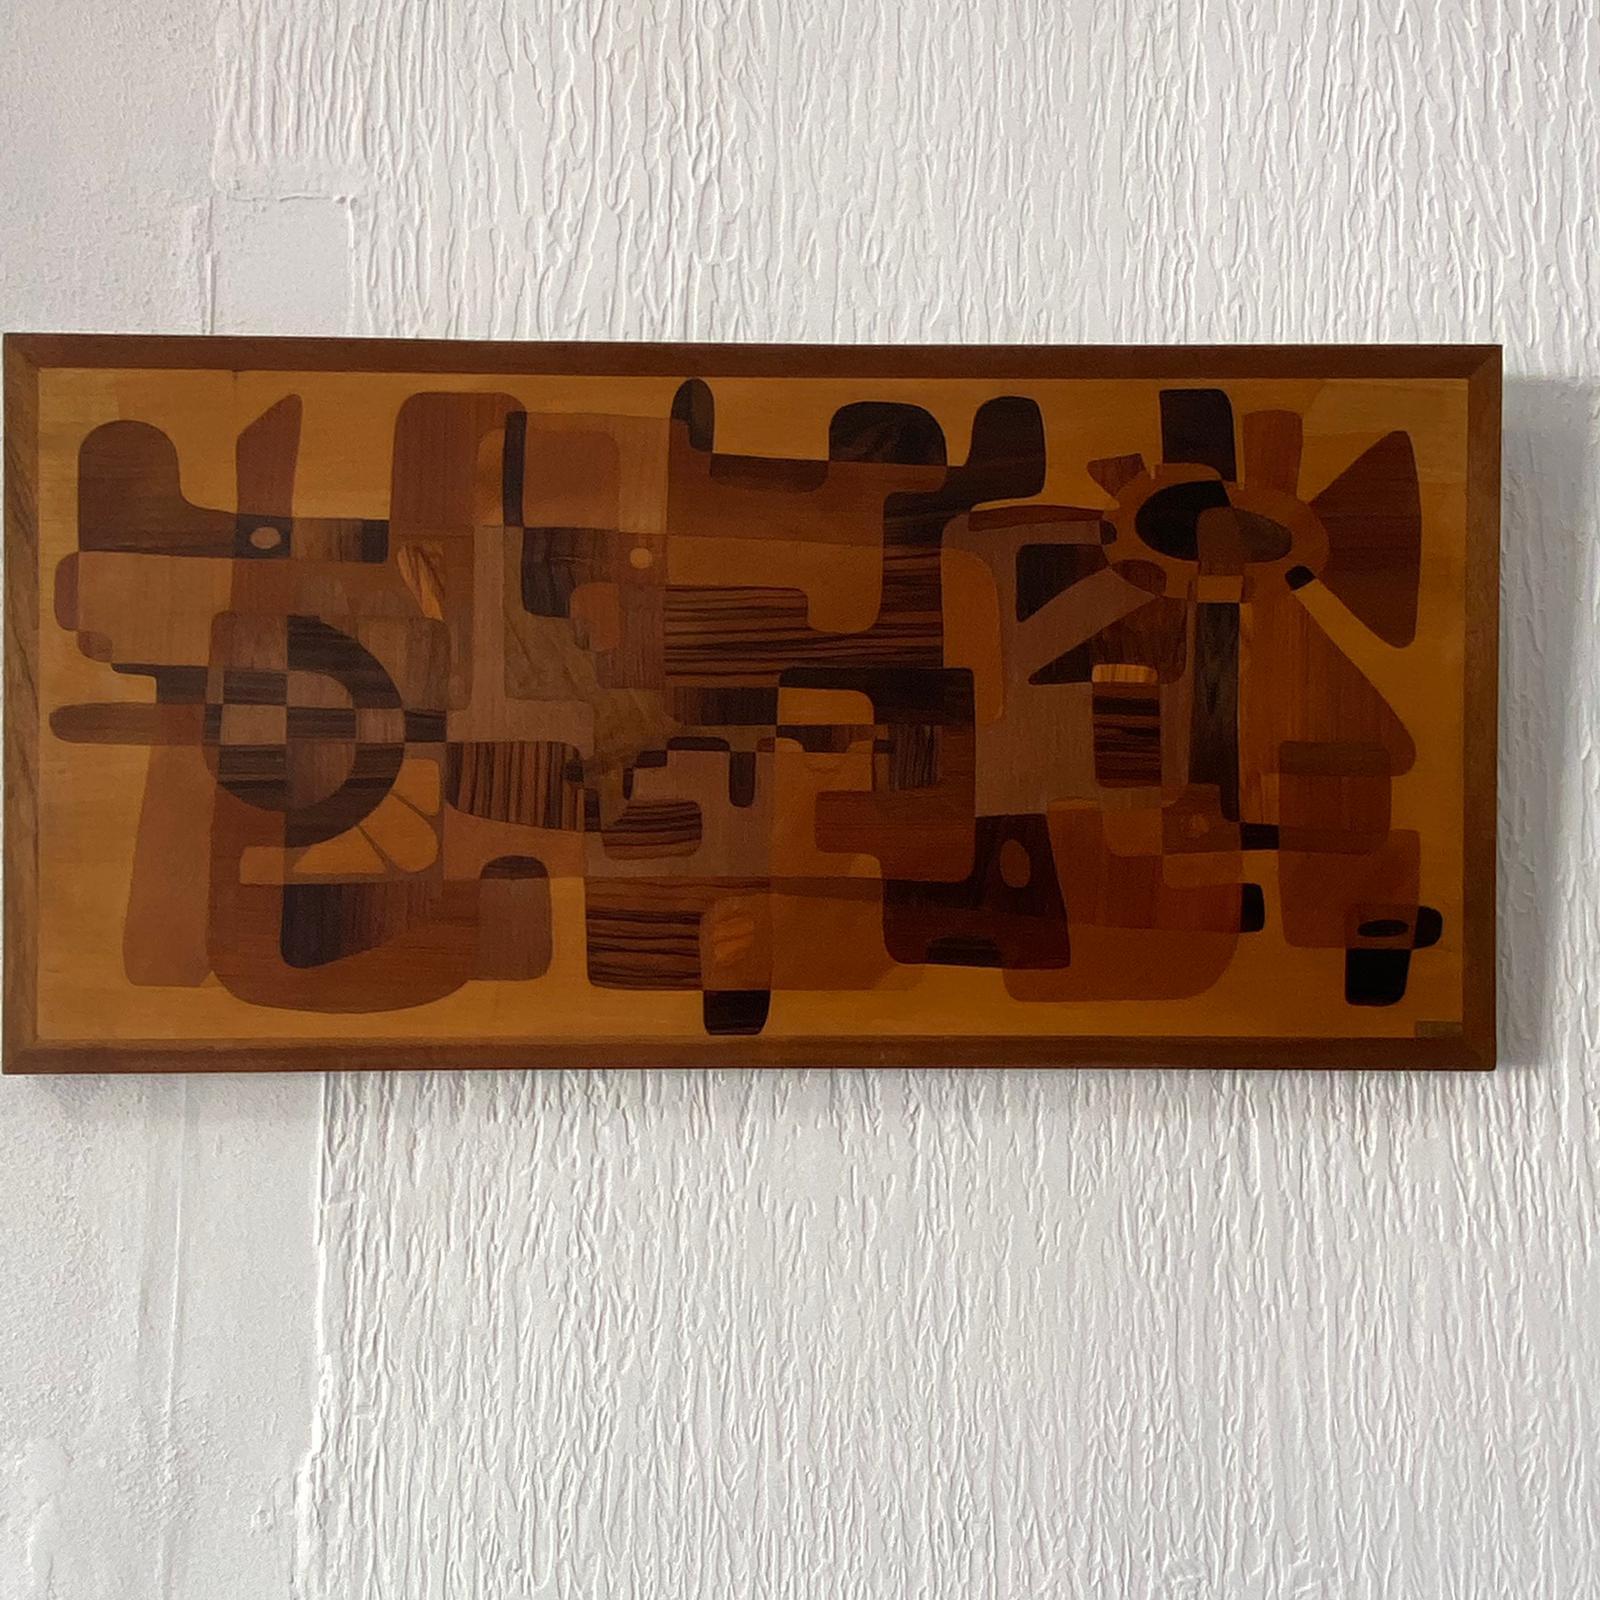 A stunning and large piece of wall art that is in such harmony with any home. Amazing quality and design, this piece dates from the 60-70's It is clearly made by a skilled wood worker artist. the shapes are interesting and the overall deign is